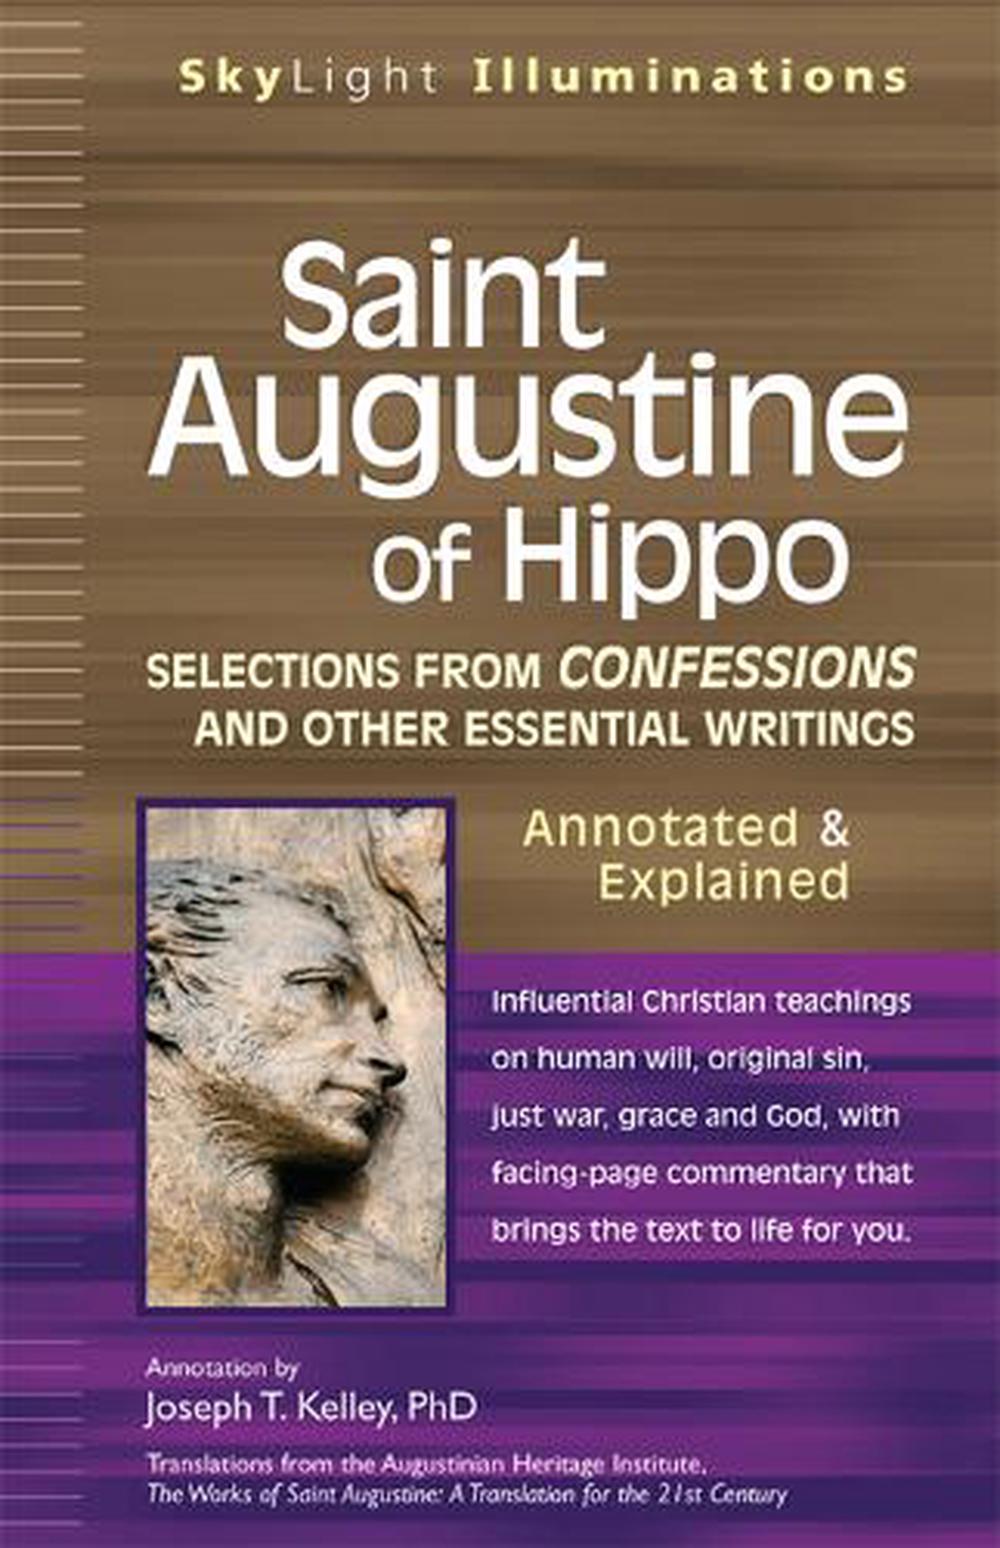 st augustine of hippo autobiography